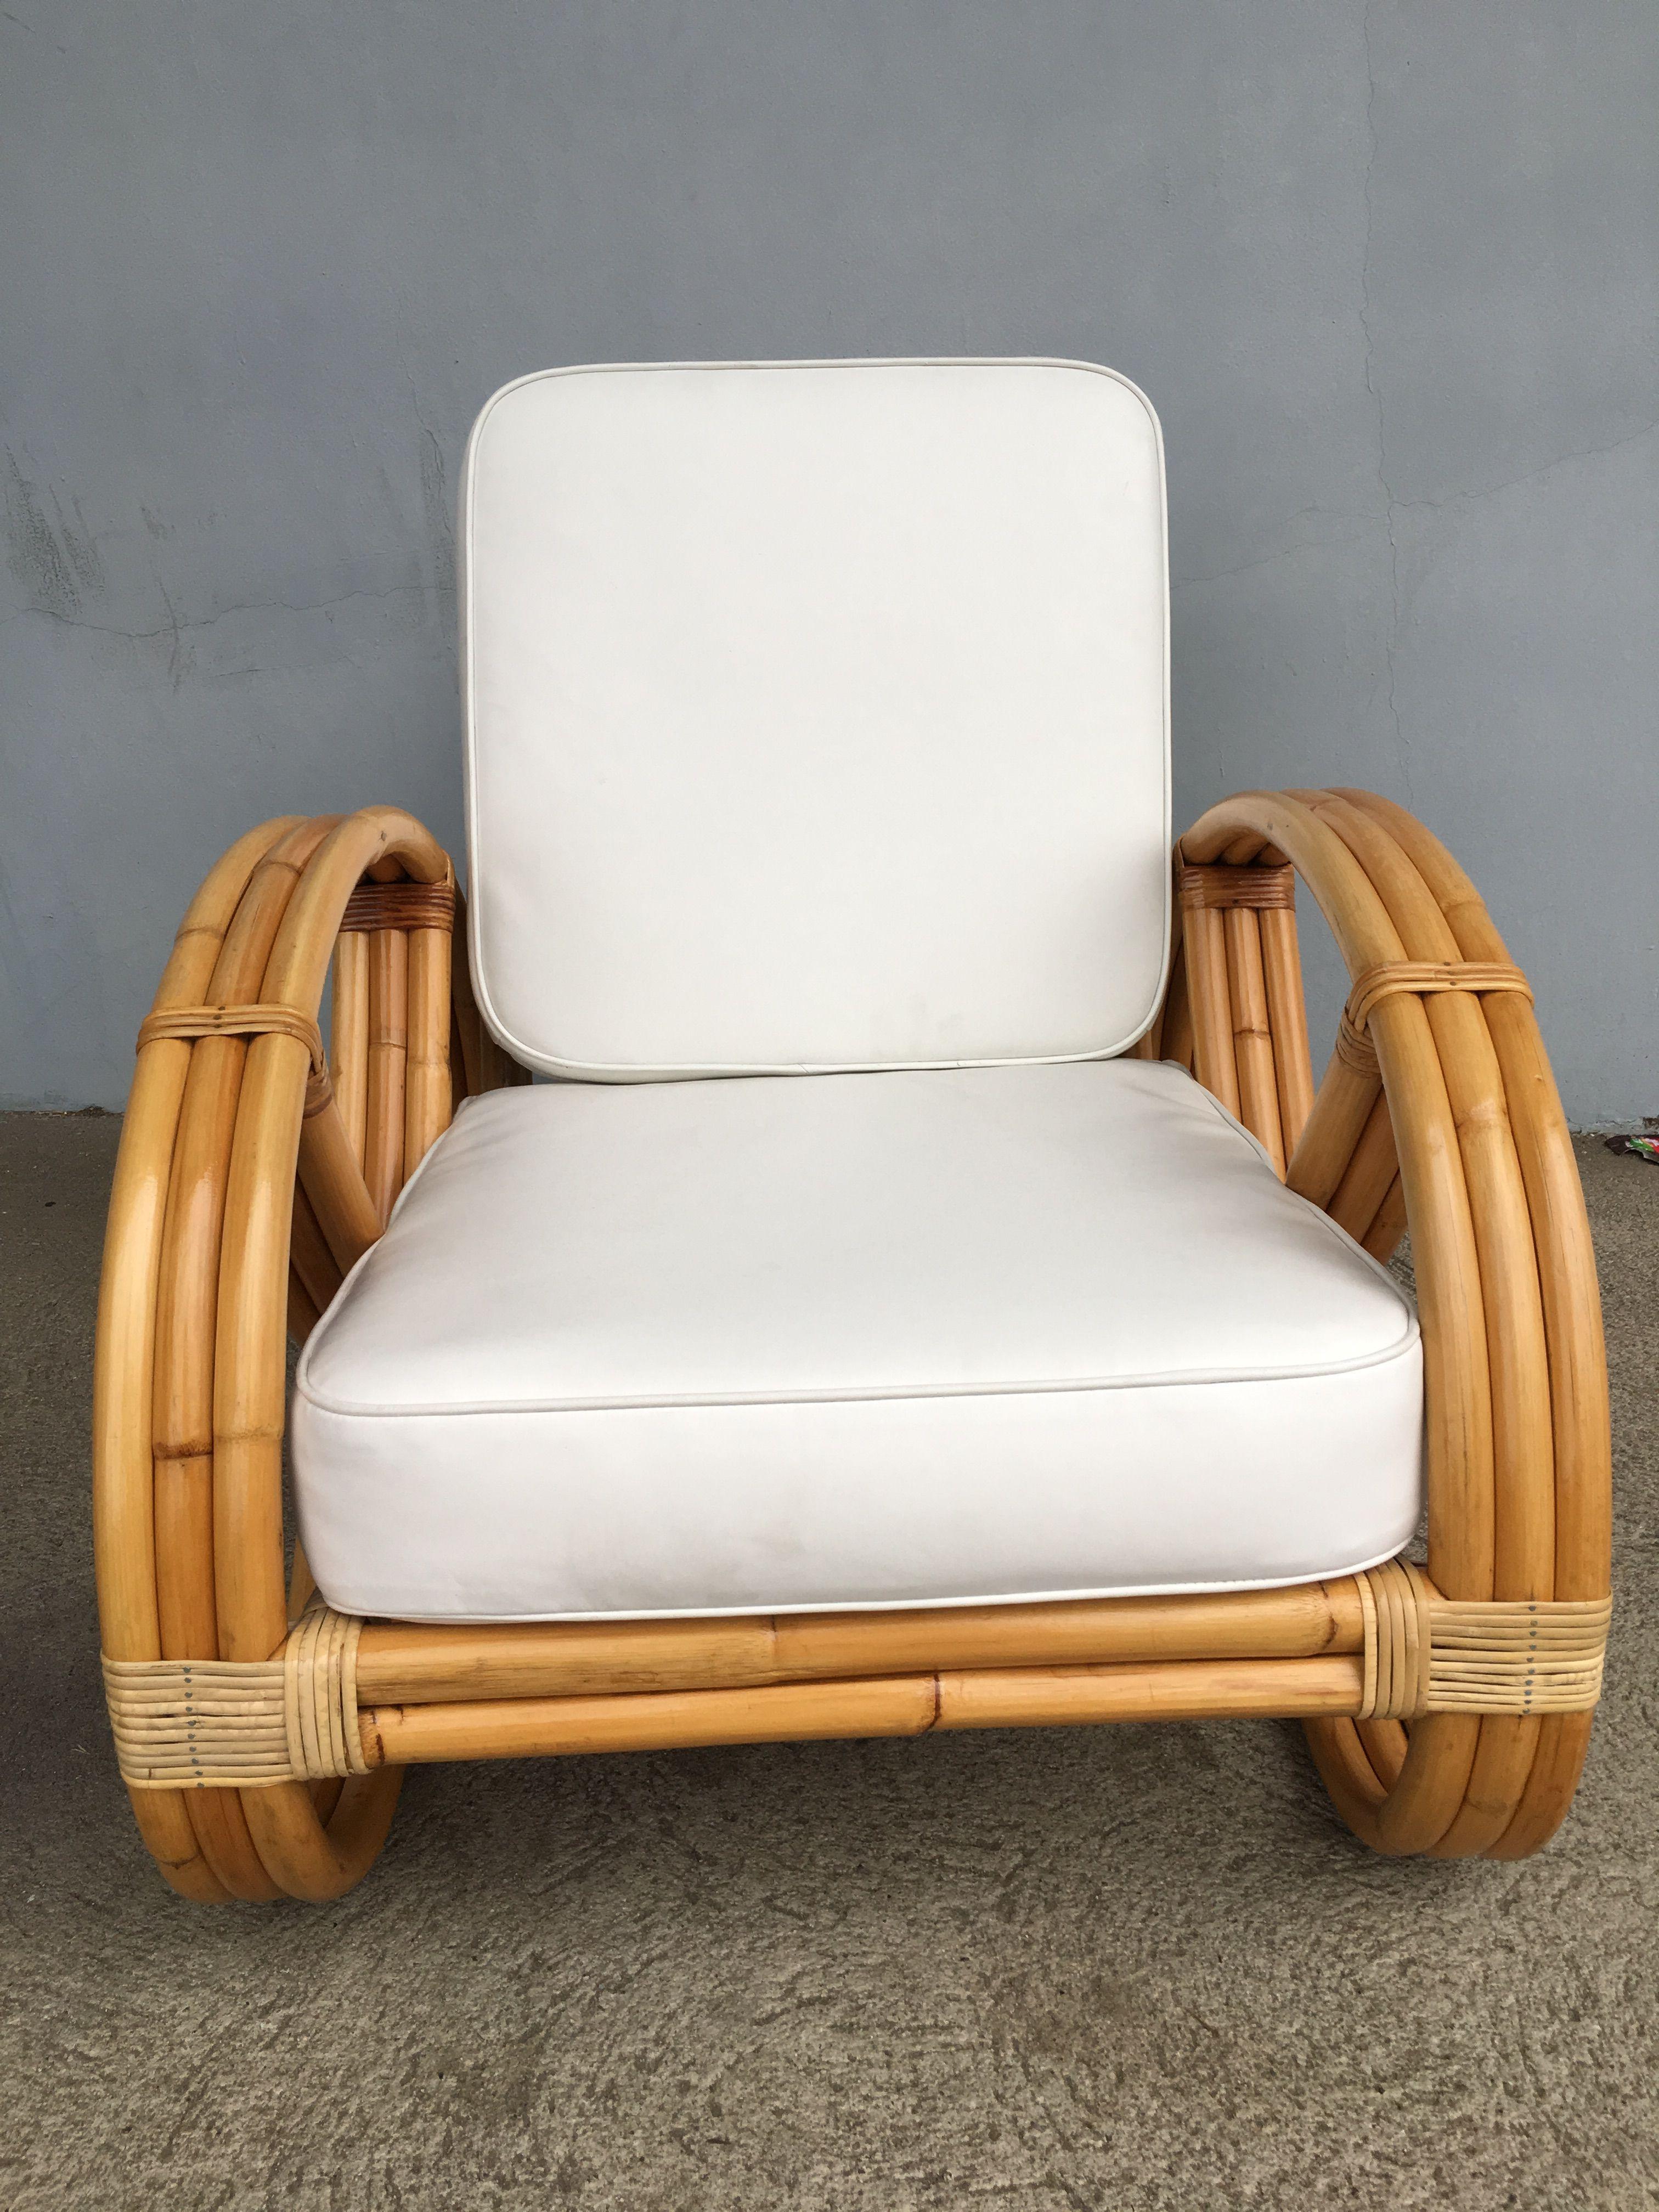 Rare three-strand round full pretzel arm rattan lounge chairs with fancy wicker wrappings. Designed in the manner of Paul Frankl. Restored to new for you. All rattan, bamboo and wicker furniture has been painstakingly refurbished to the highest